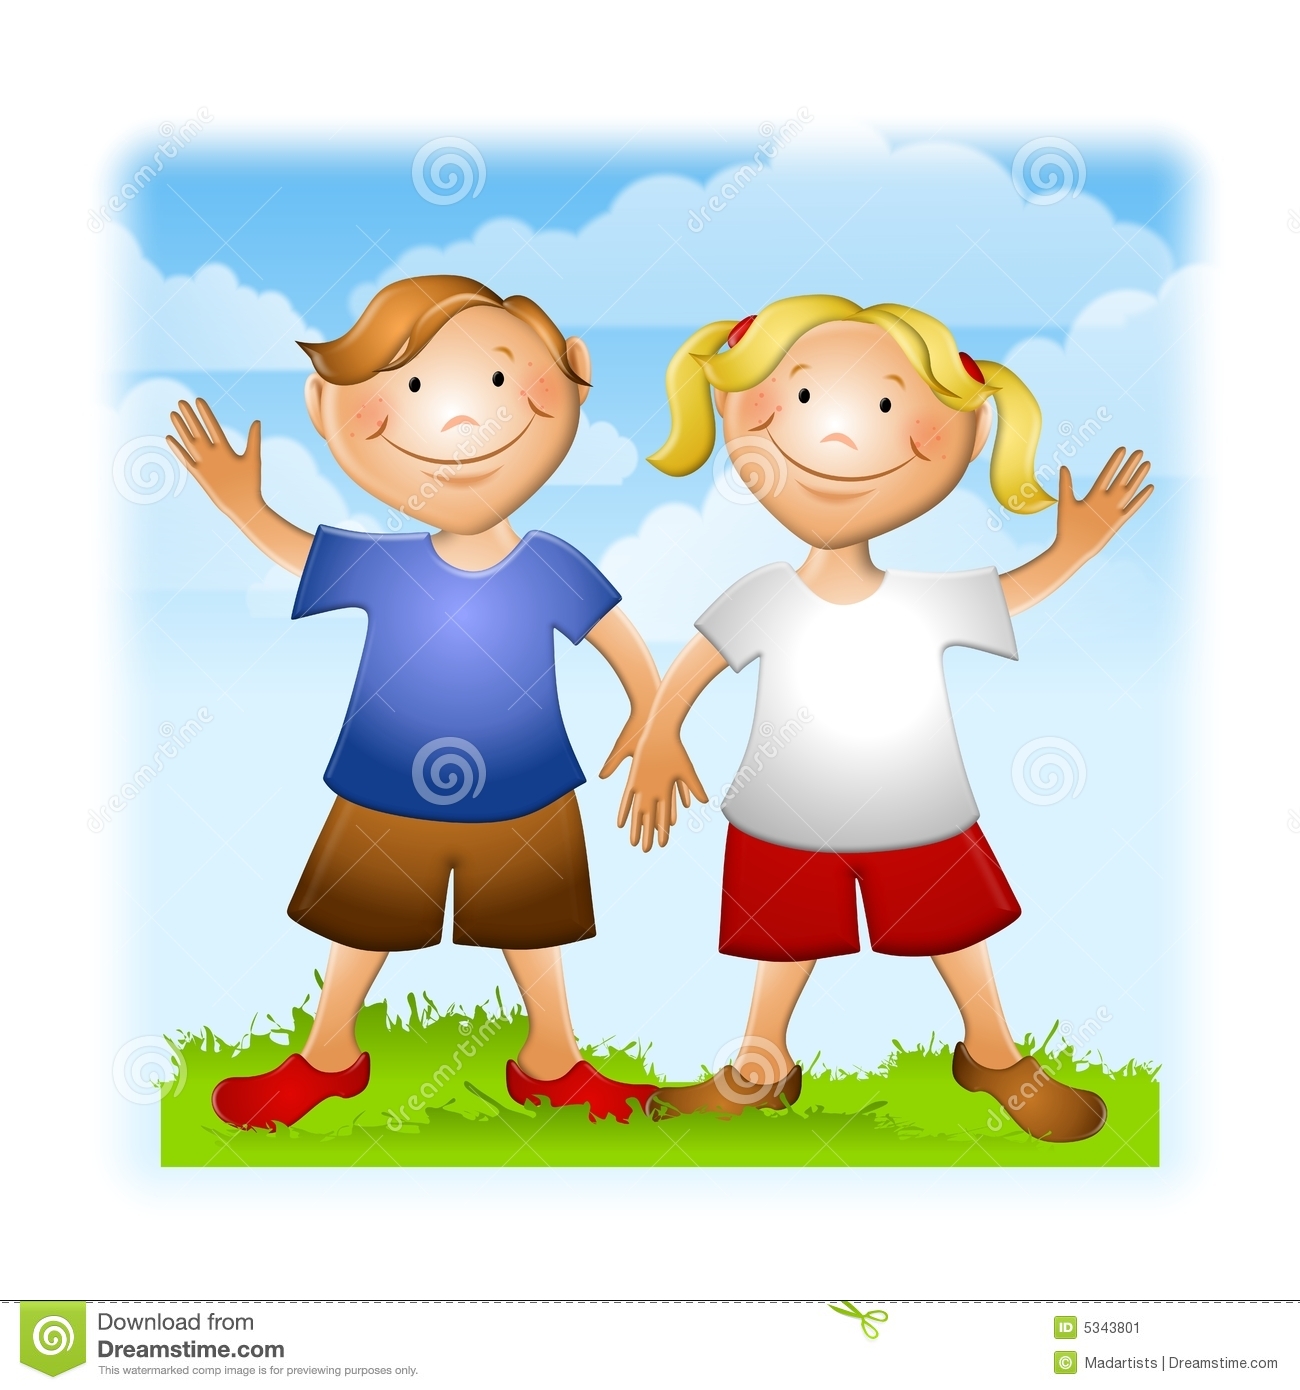 Featuring A Boy And Girl Holding Hands And Waving With A Summer Theme